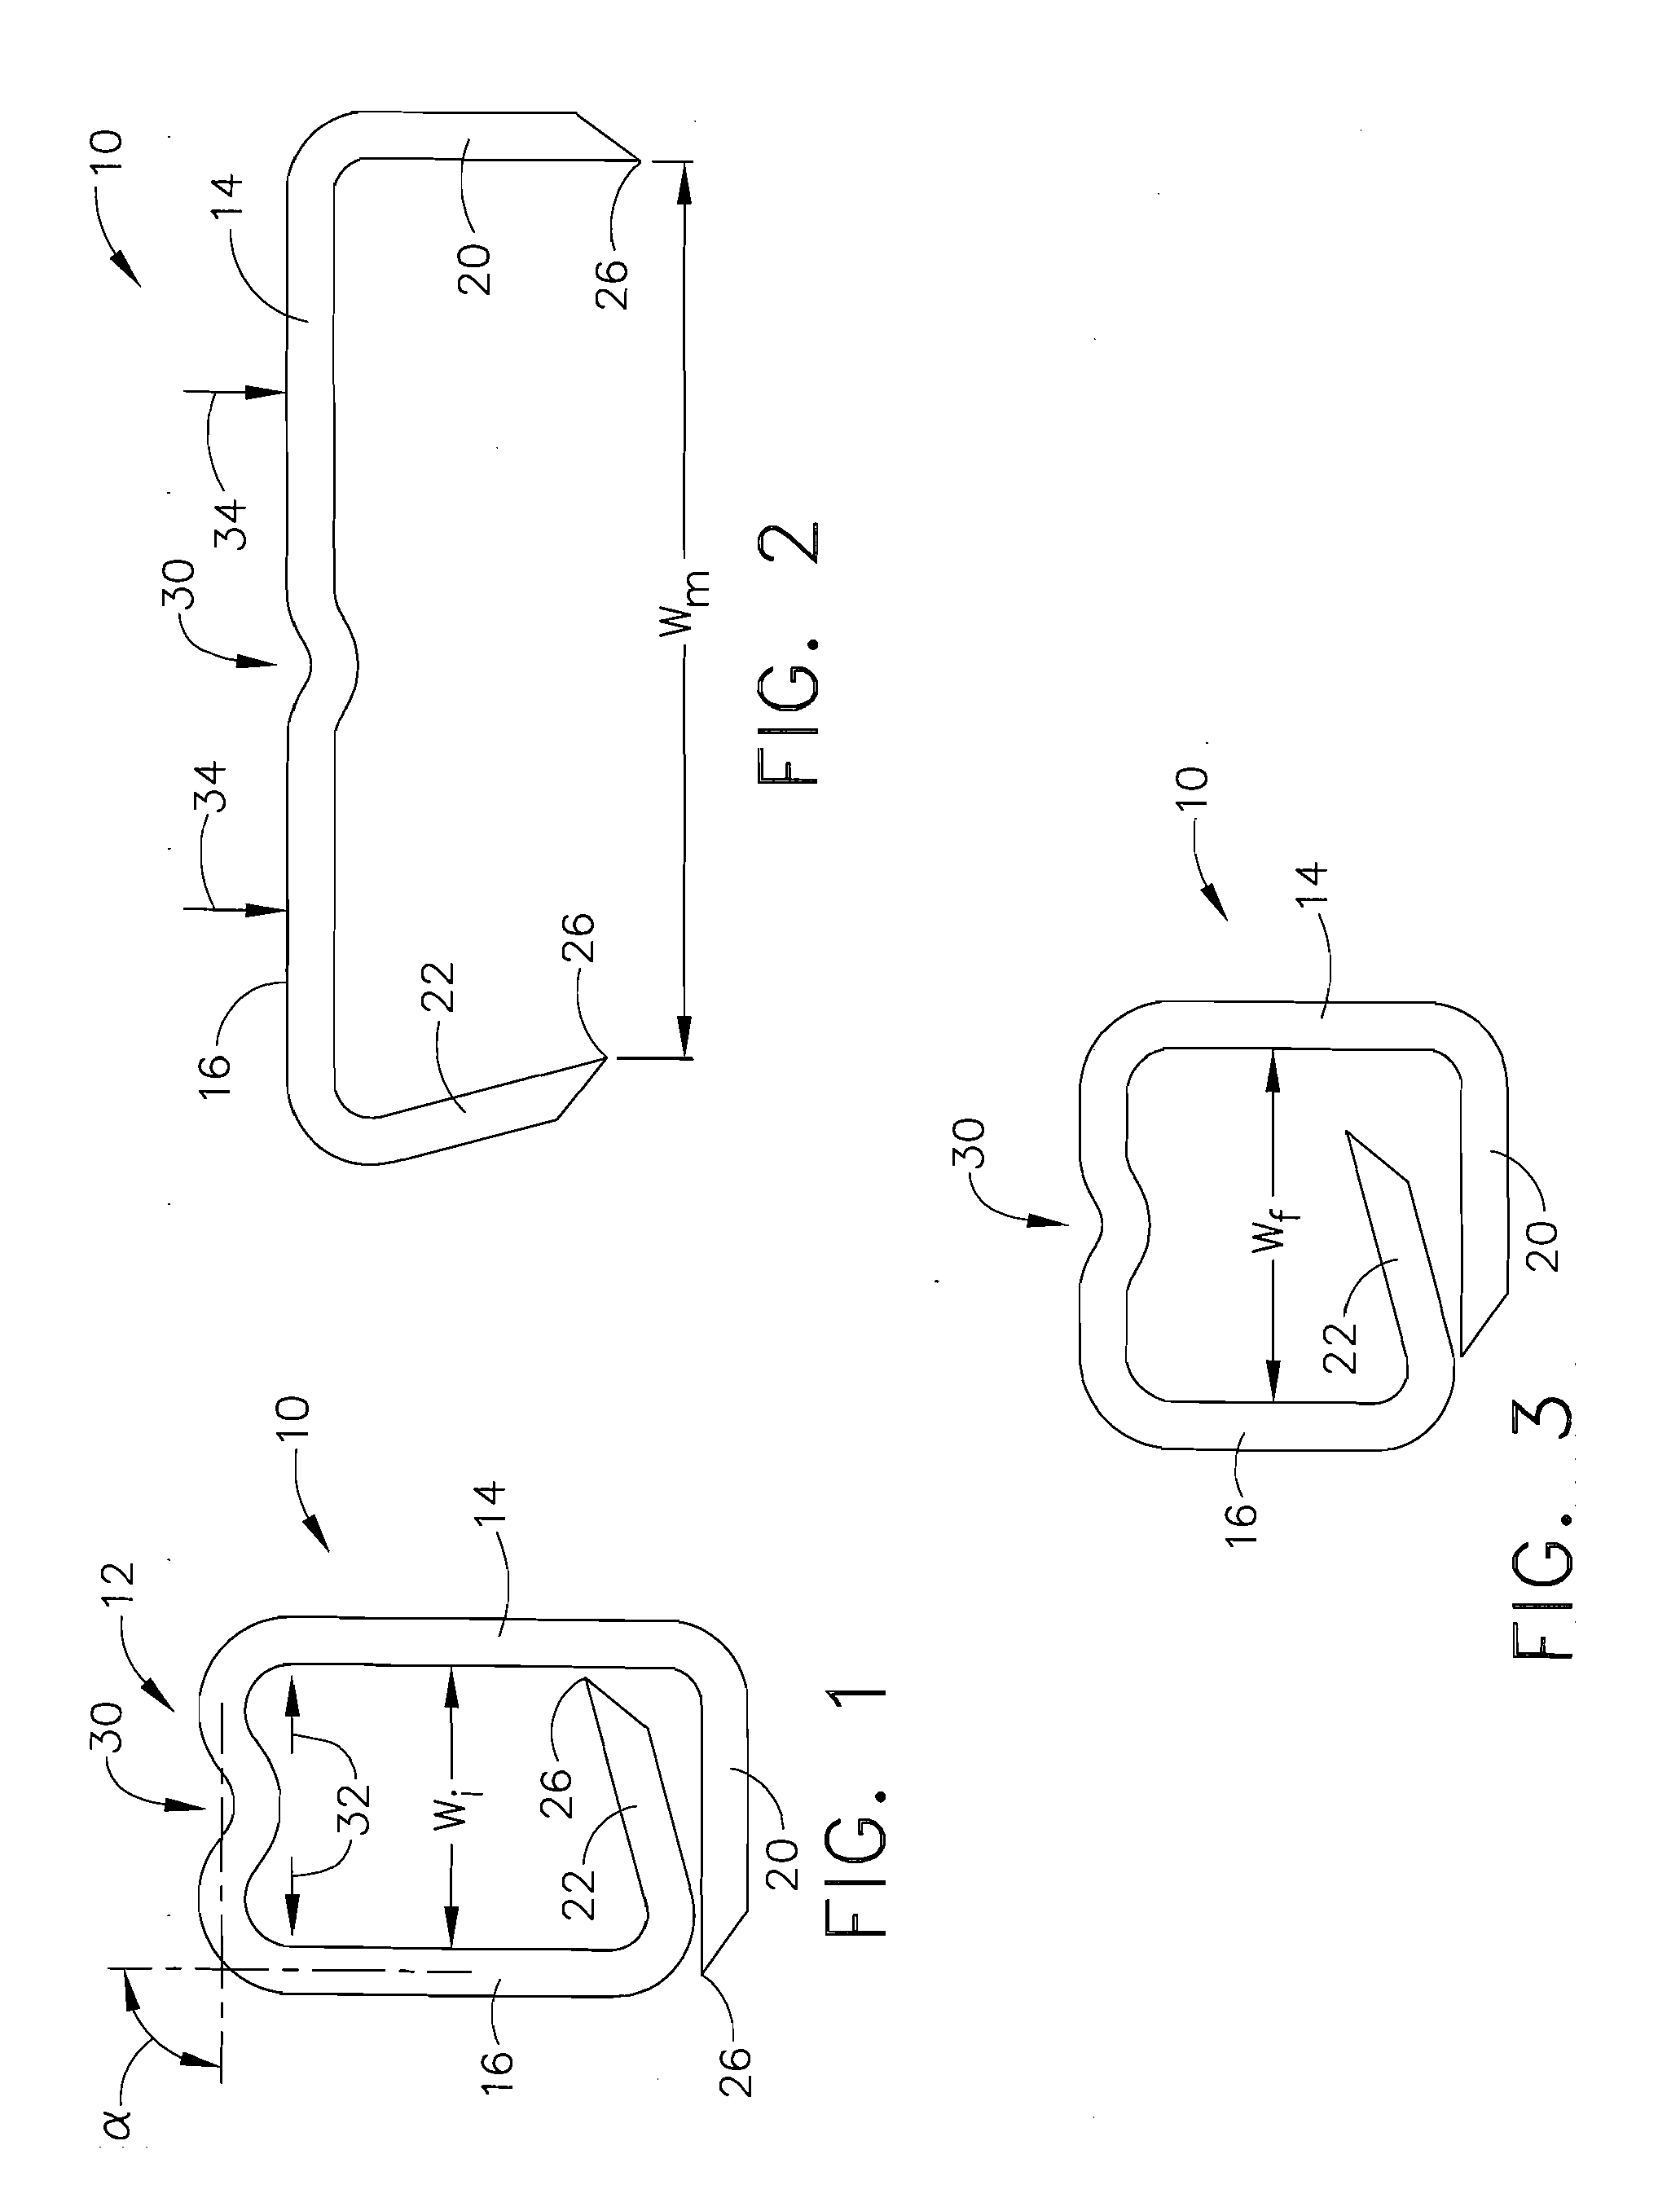 Surgical Stapler For Applying A Large Staple Through A Small Delivery Port And A Method of Using The Stapler To Secure A Tissue Fold